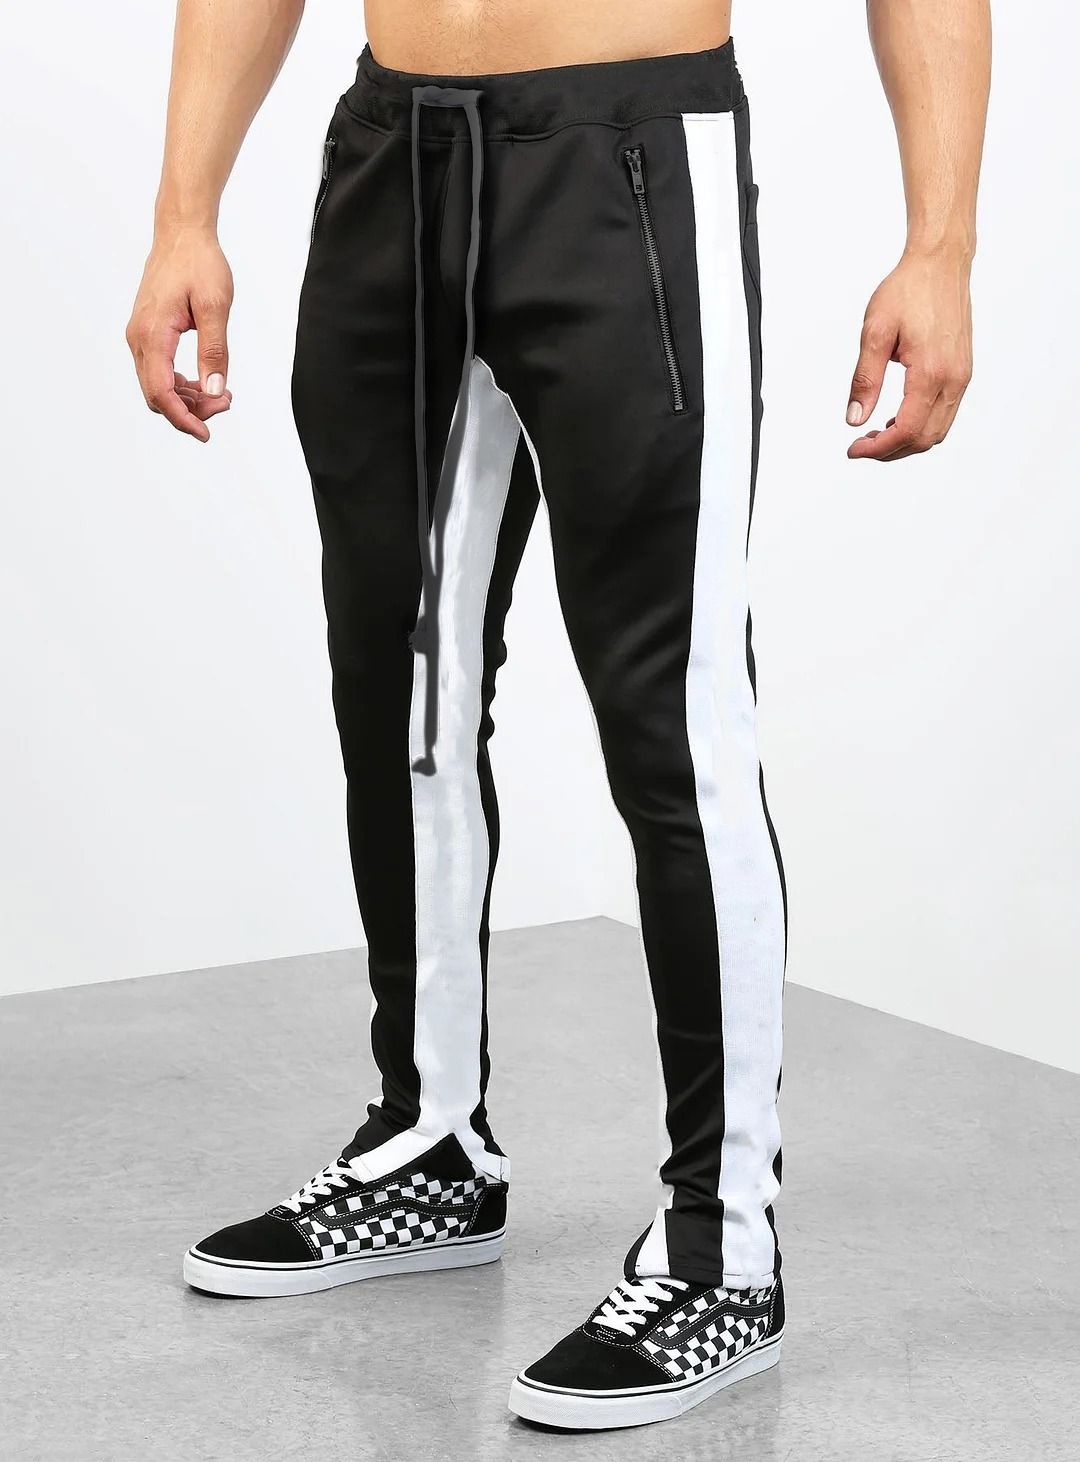 Buy Stylish Black & White Contrasted Panelling Trouser For Men at ...